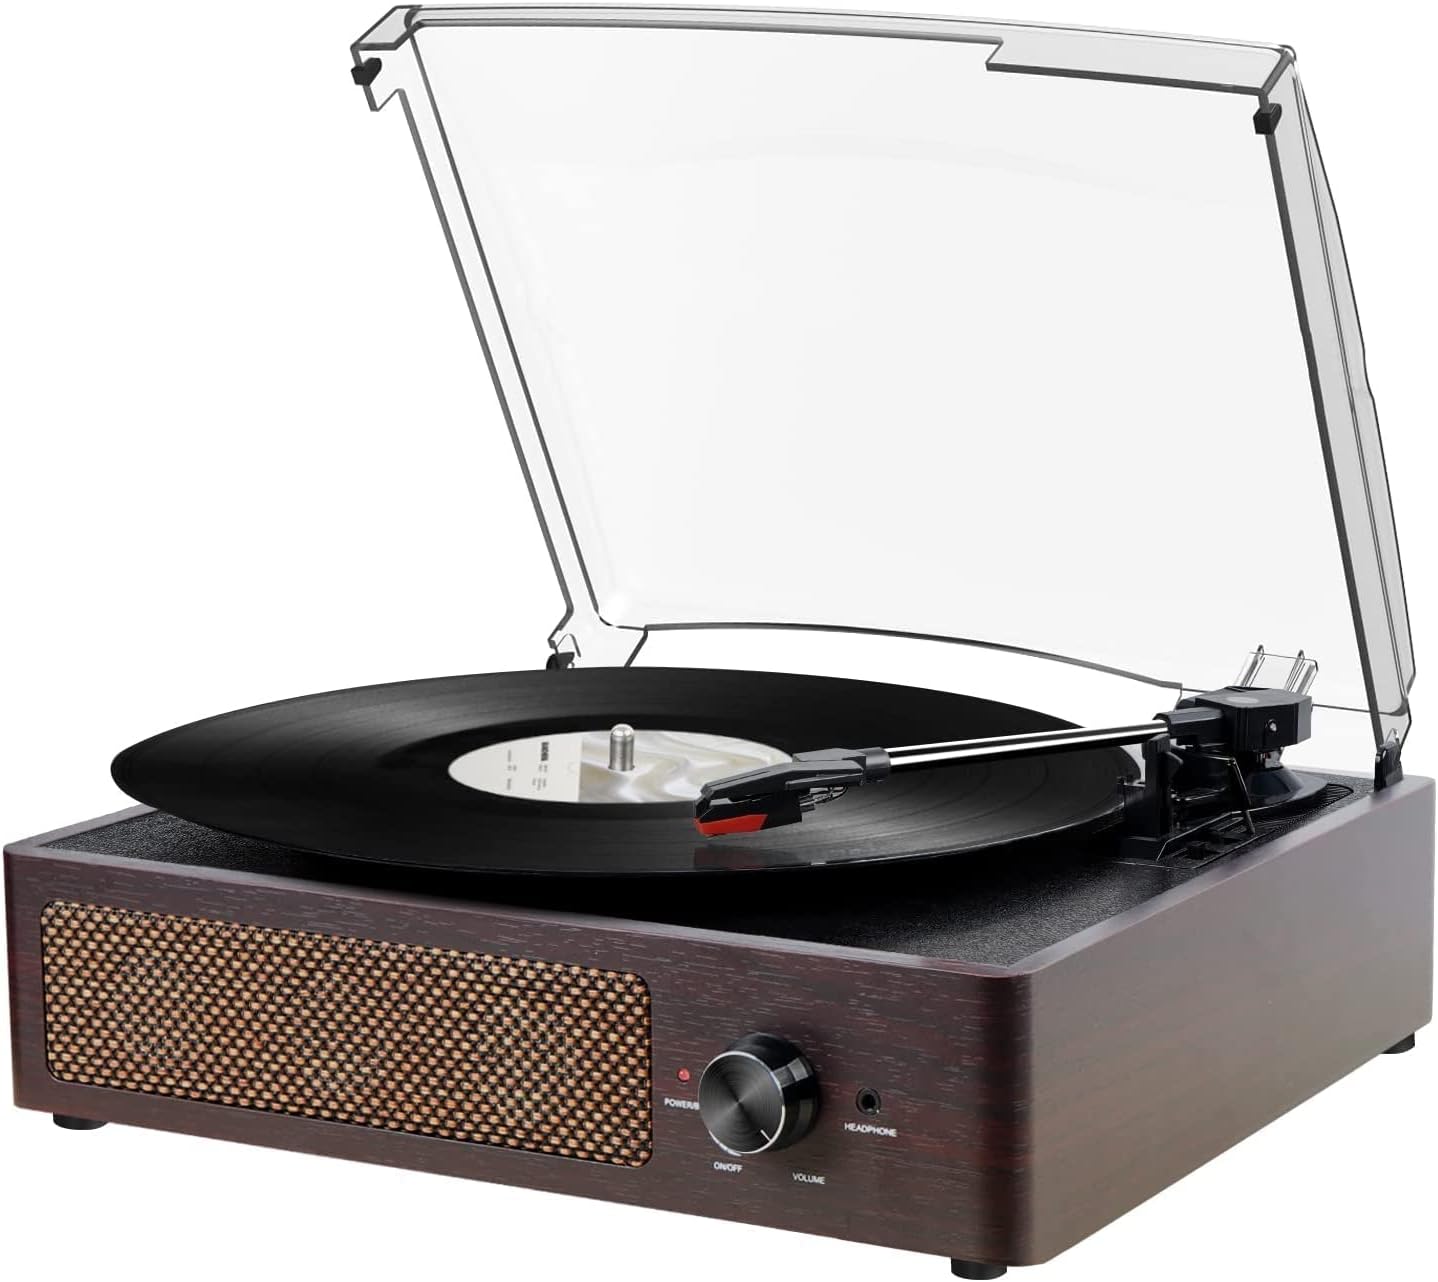 The best Christmas gift ideas for teen girls: record player